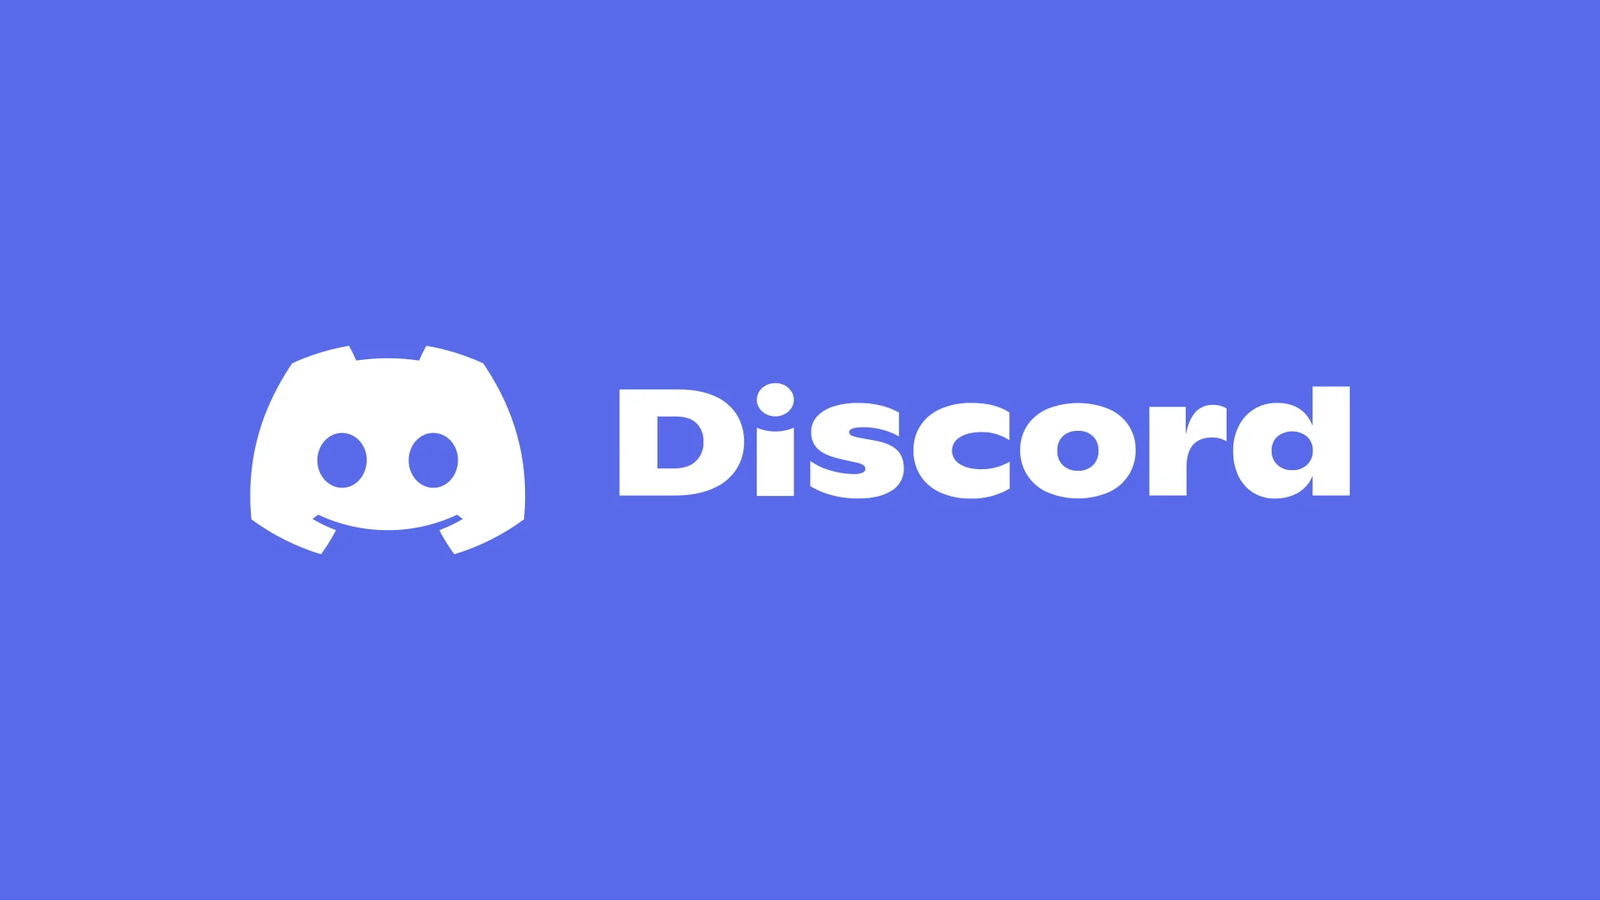 Discord brings back 'Swipe to reply' once again pushing users to look for ways to disable feature